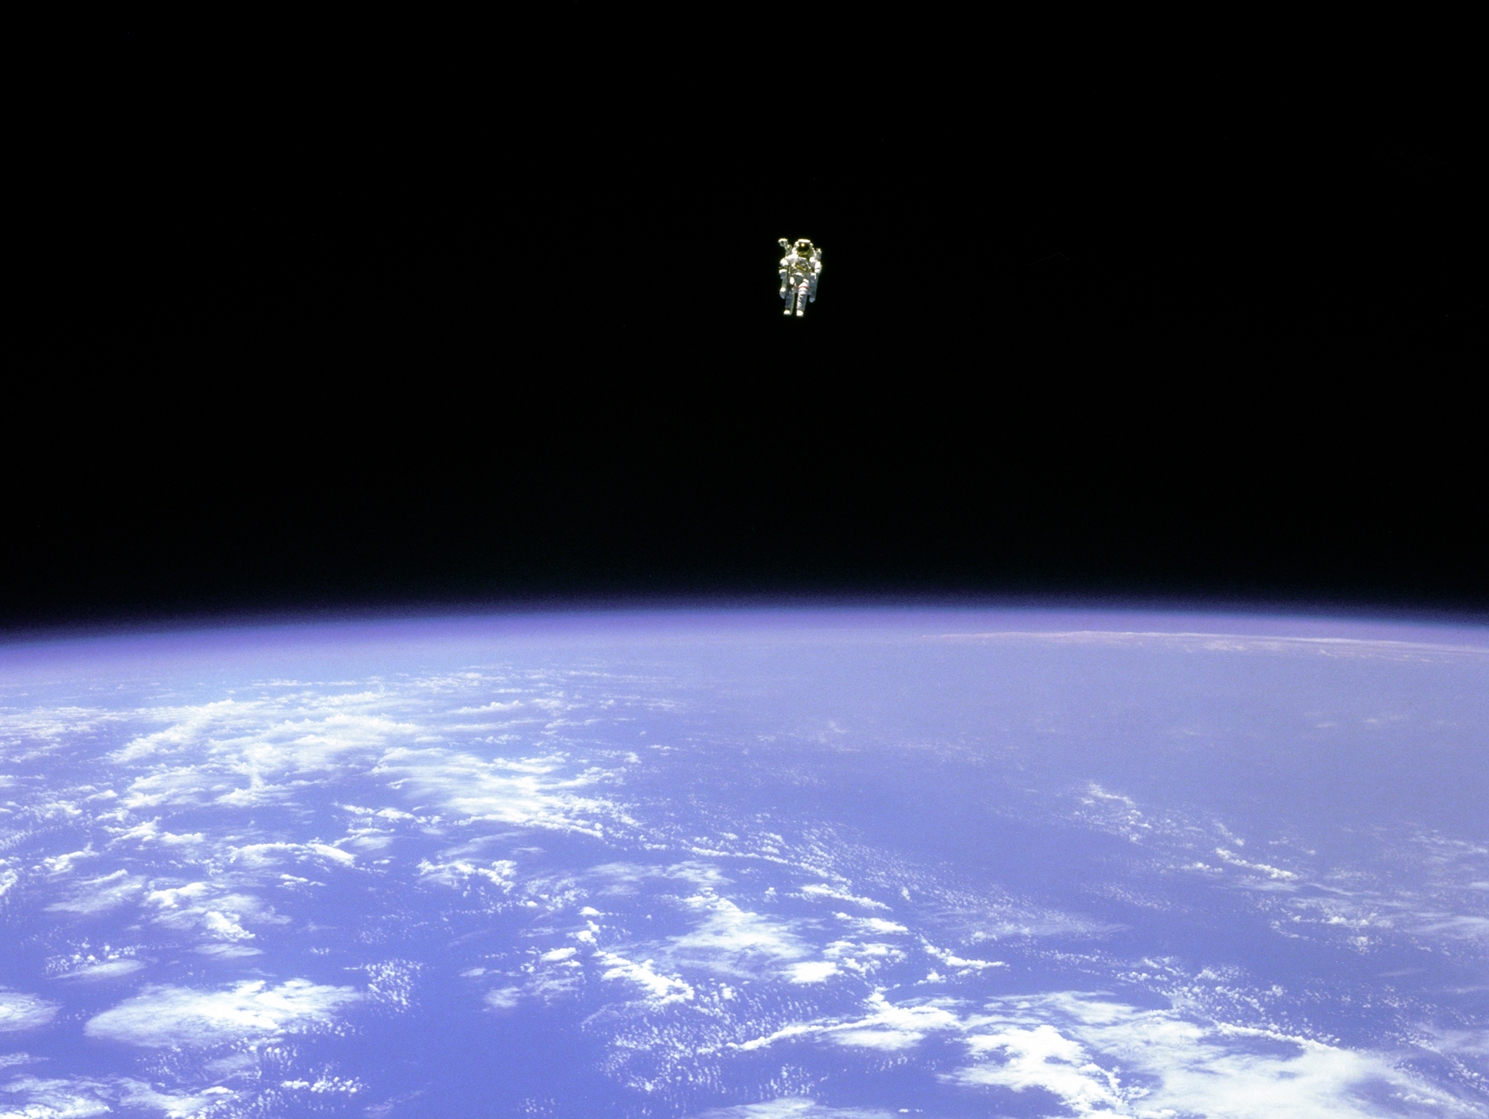 Astronaut floating in outer space against a beautiful background.